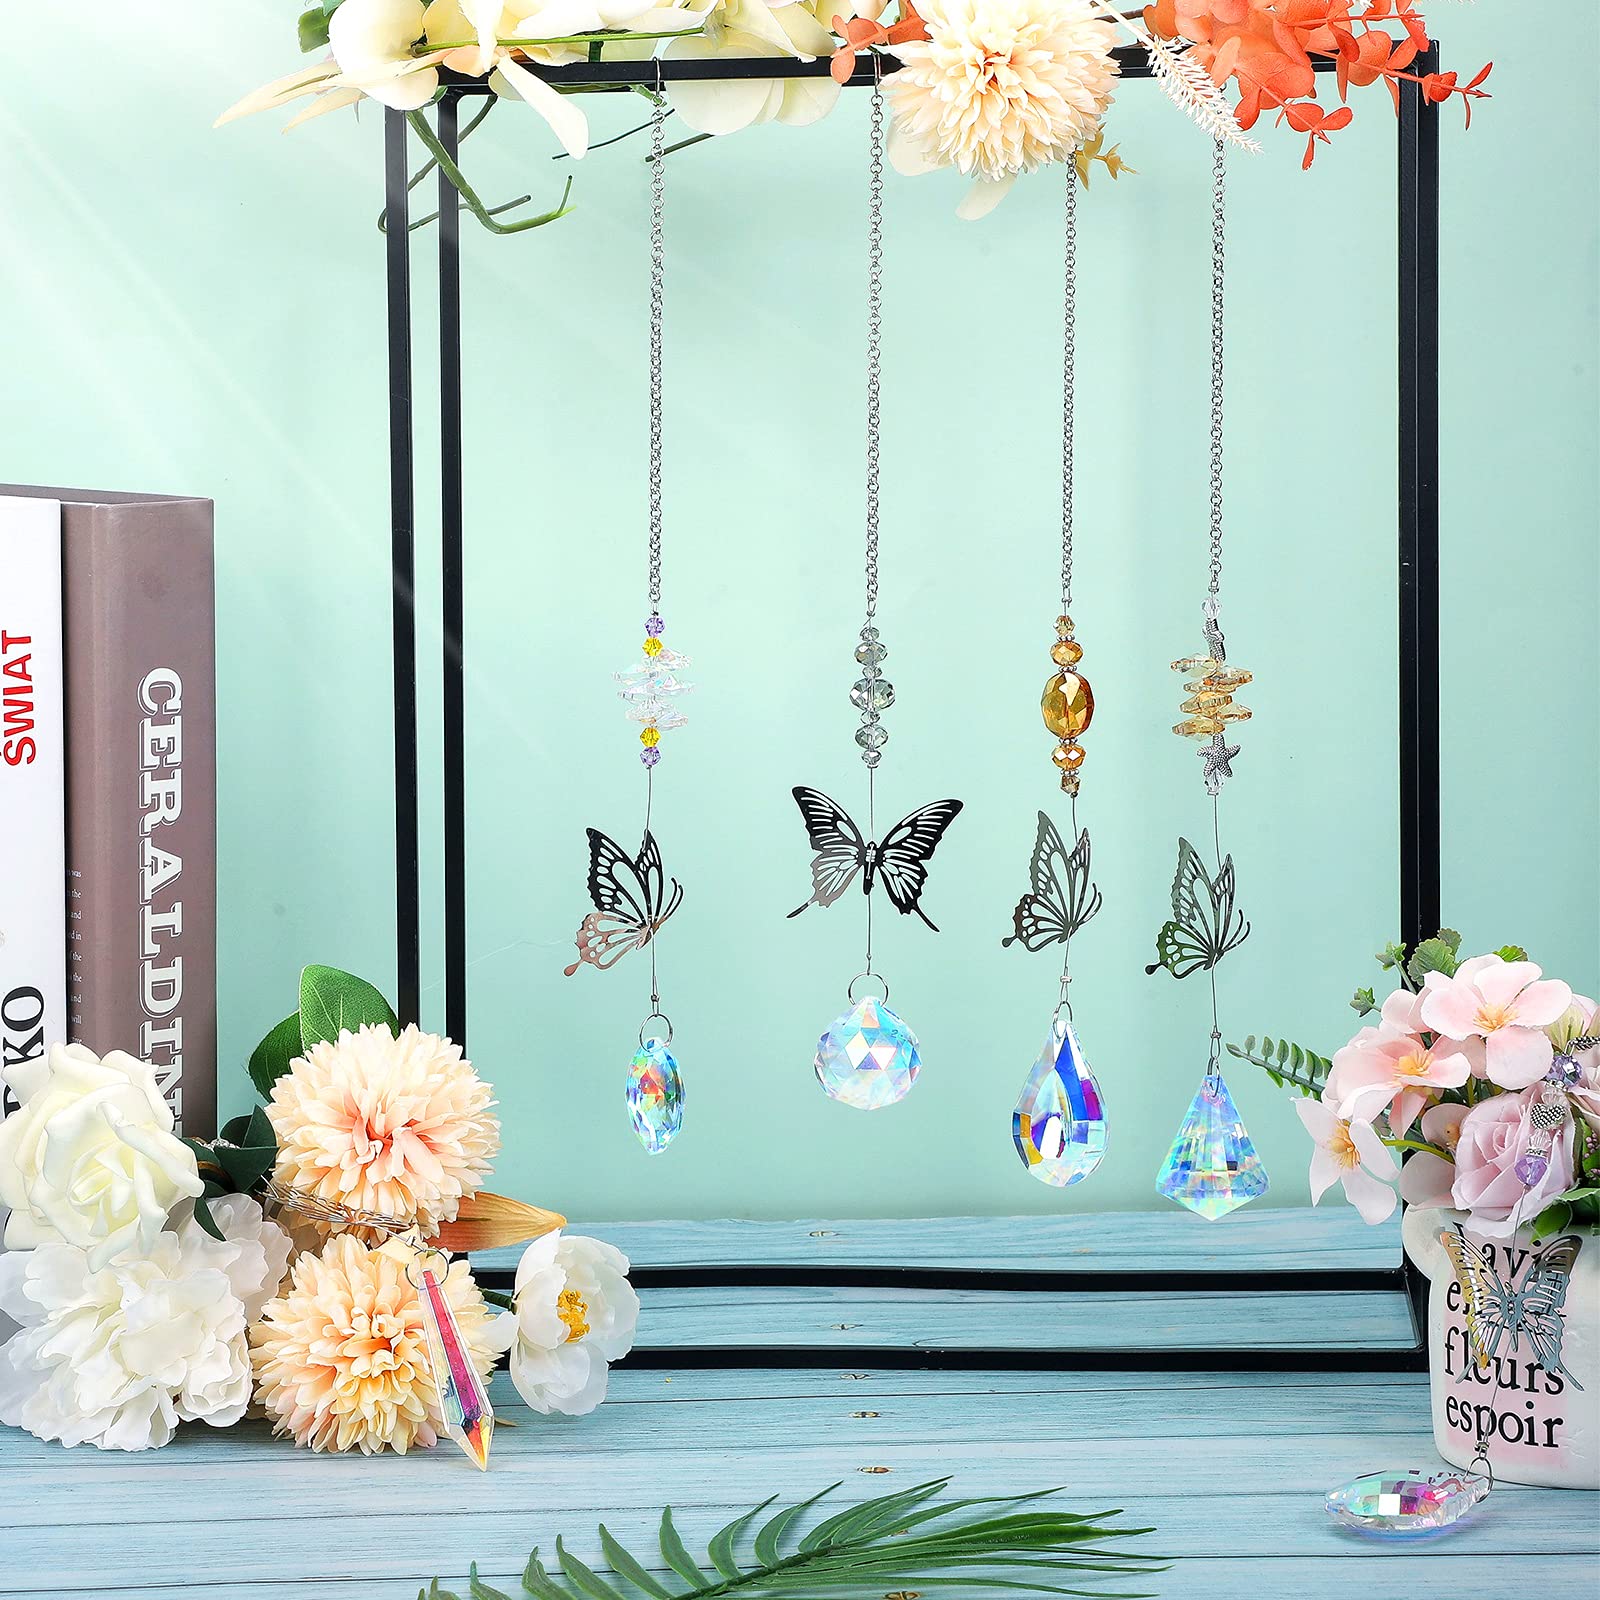 7 Pieces Crystals Suncatcher Butterfly Sun Catchers Colorful Crystal Chandelier Pendant Hummingbird Wall Hanging Tree Window Prism Ornament (Charming Colors, Butterfly Style)